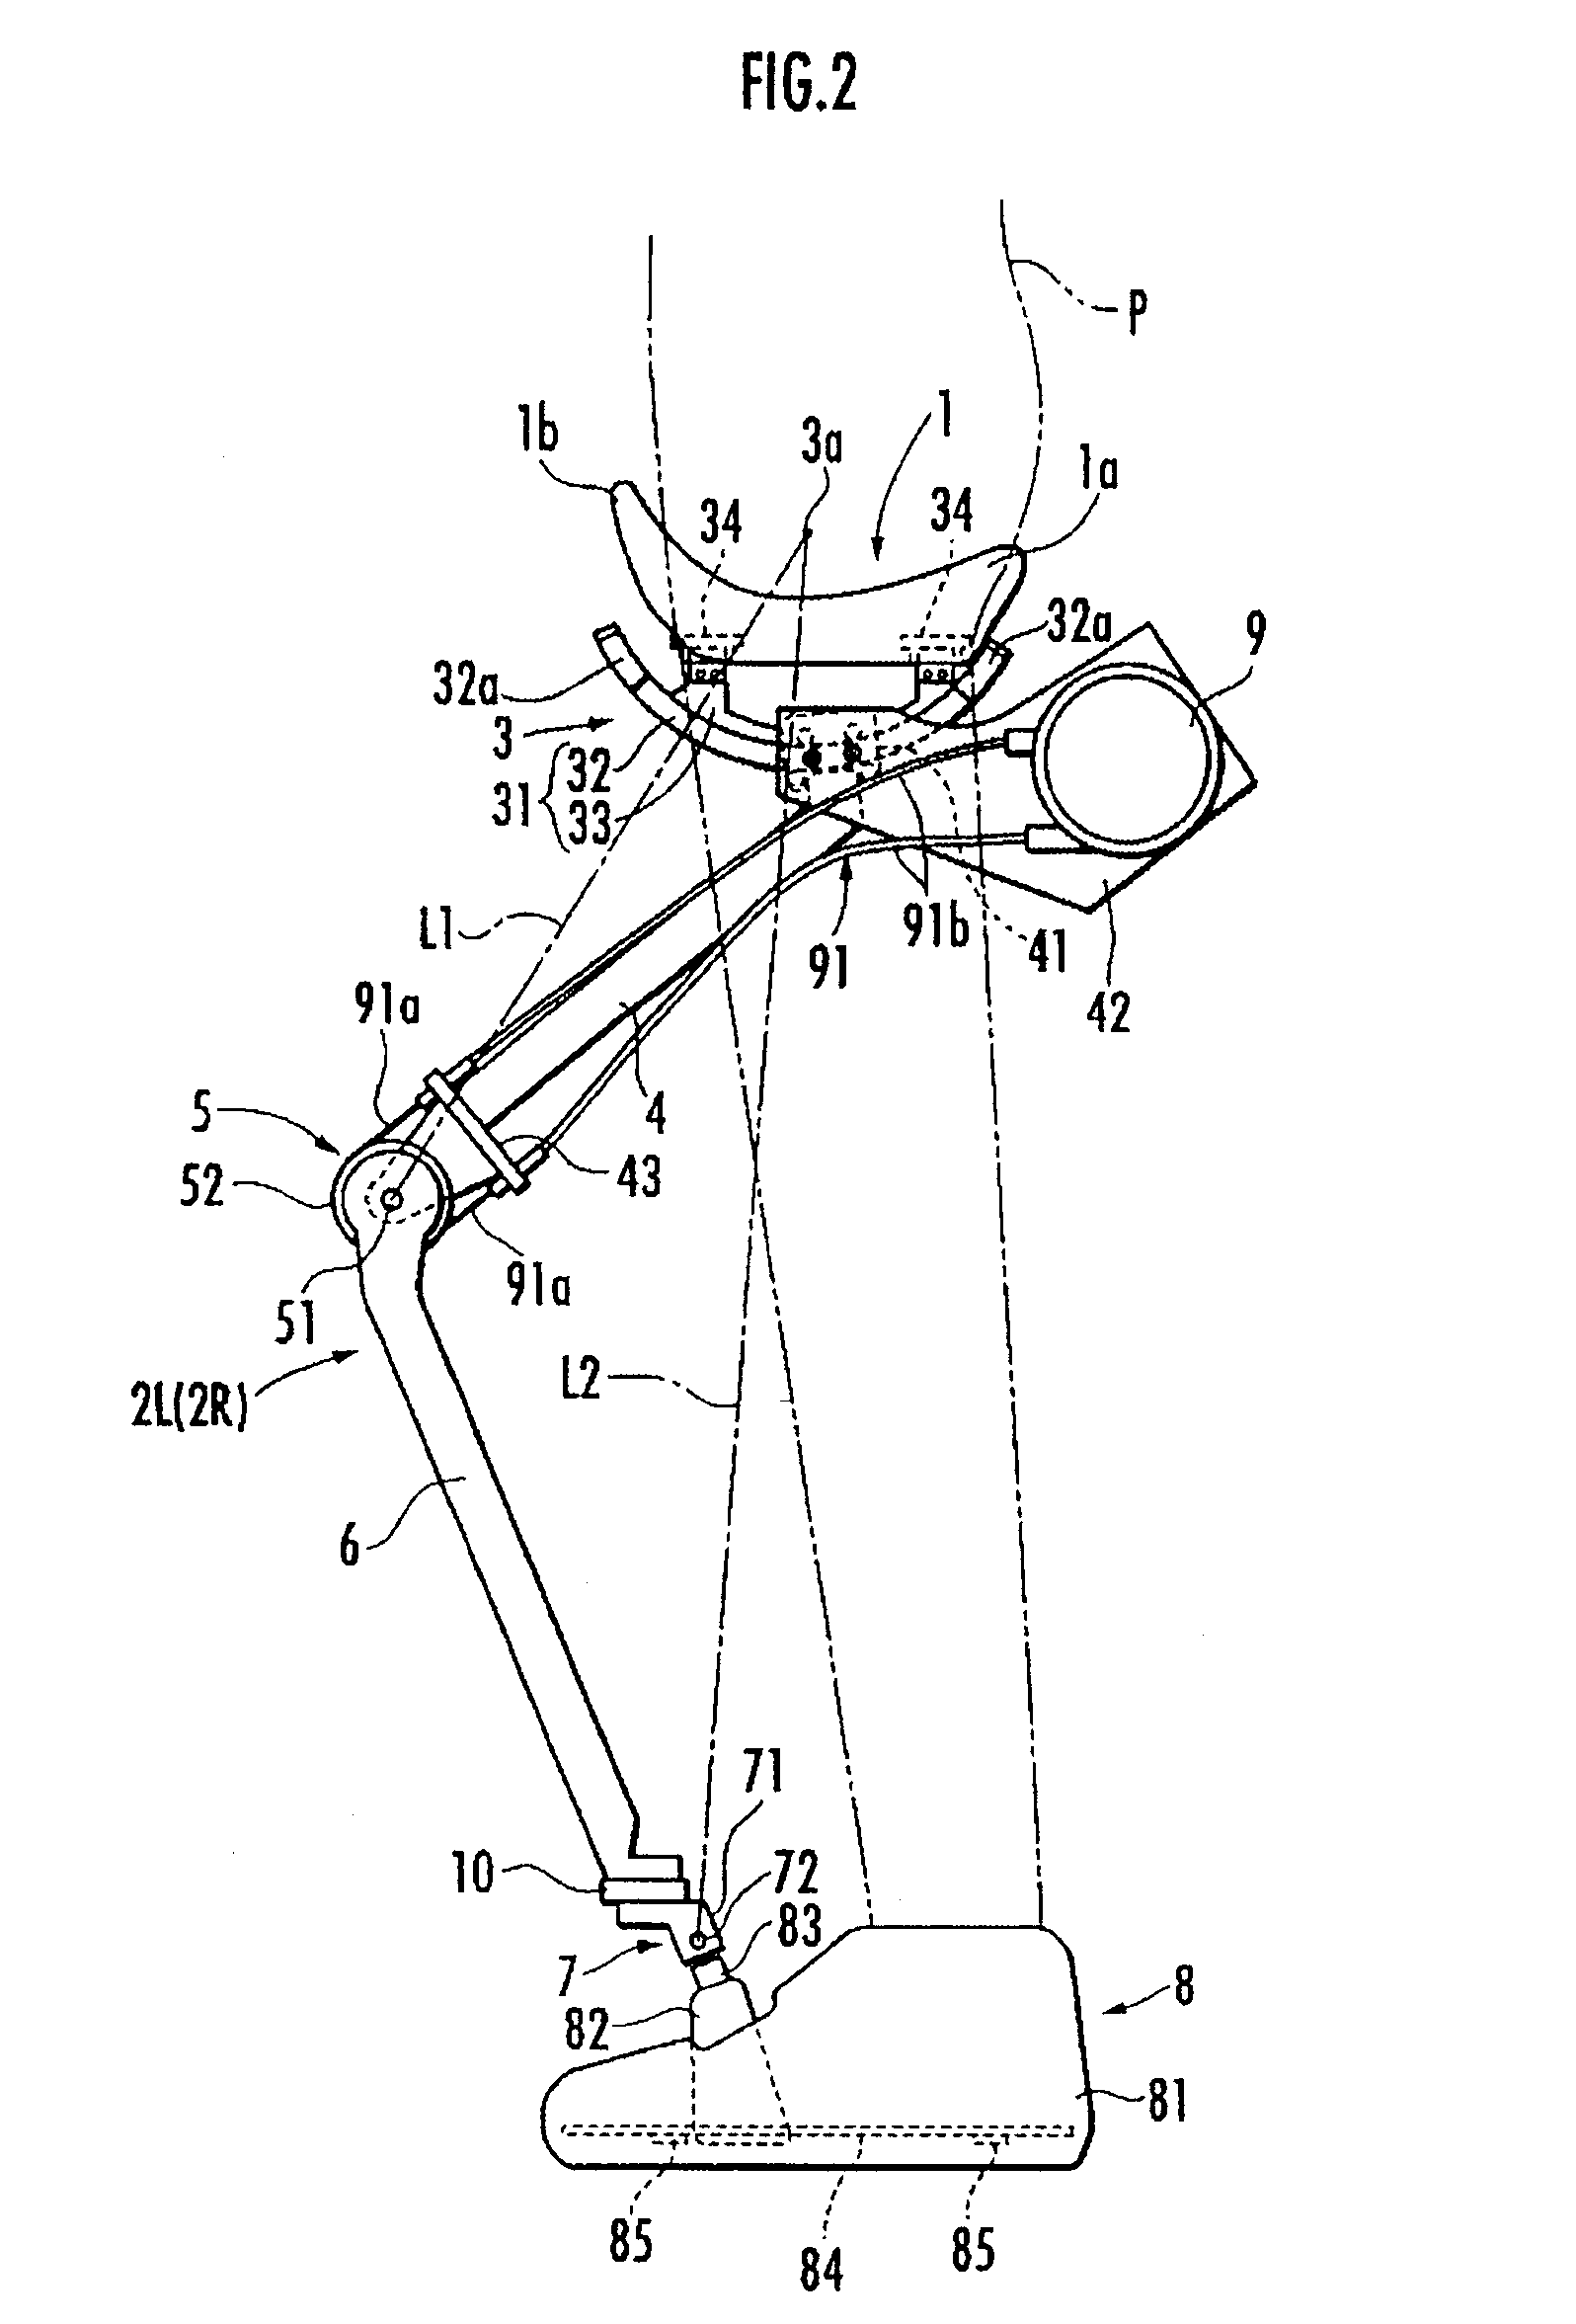 Walking assisting device